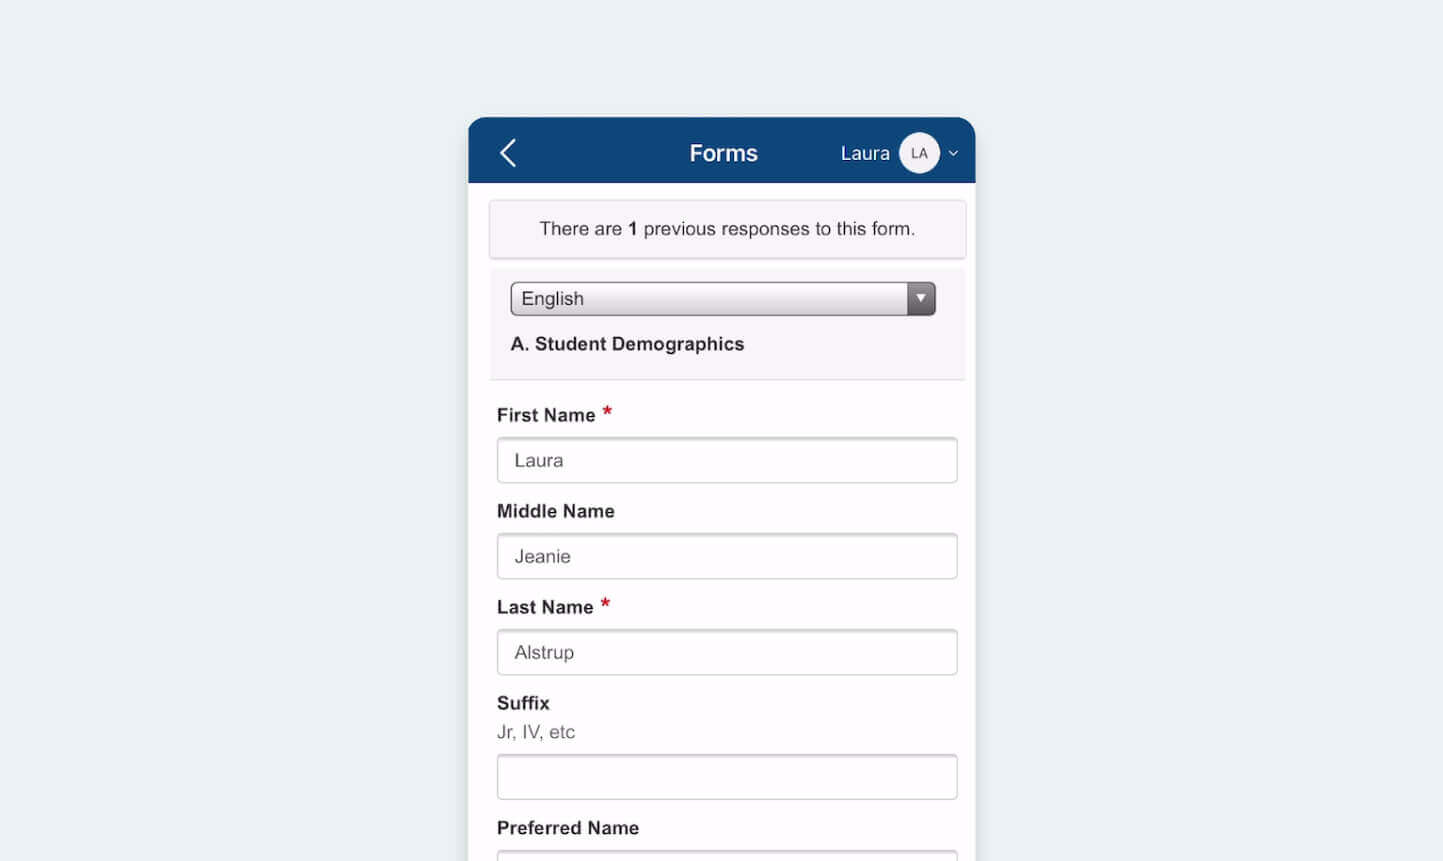 Improve families’ experience and response rates for schools and districts by allowing parents to access and complete forms on any device through their PowerSchool Mobile App.